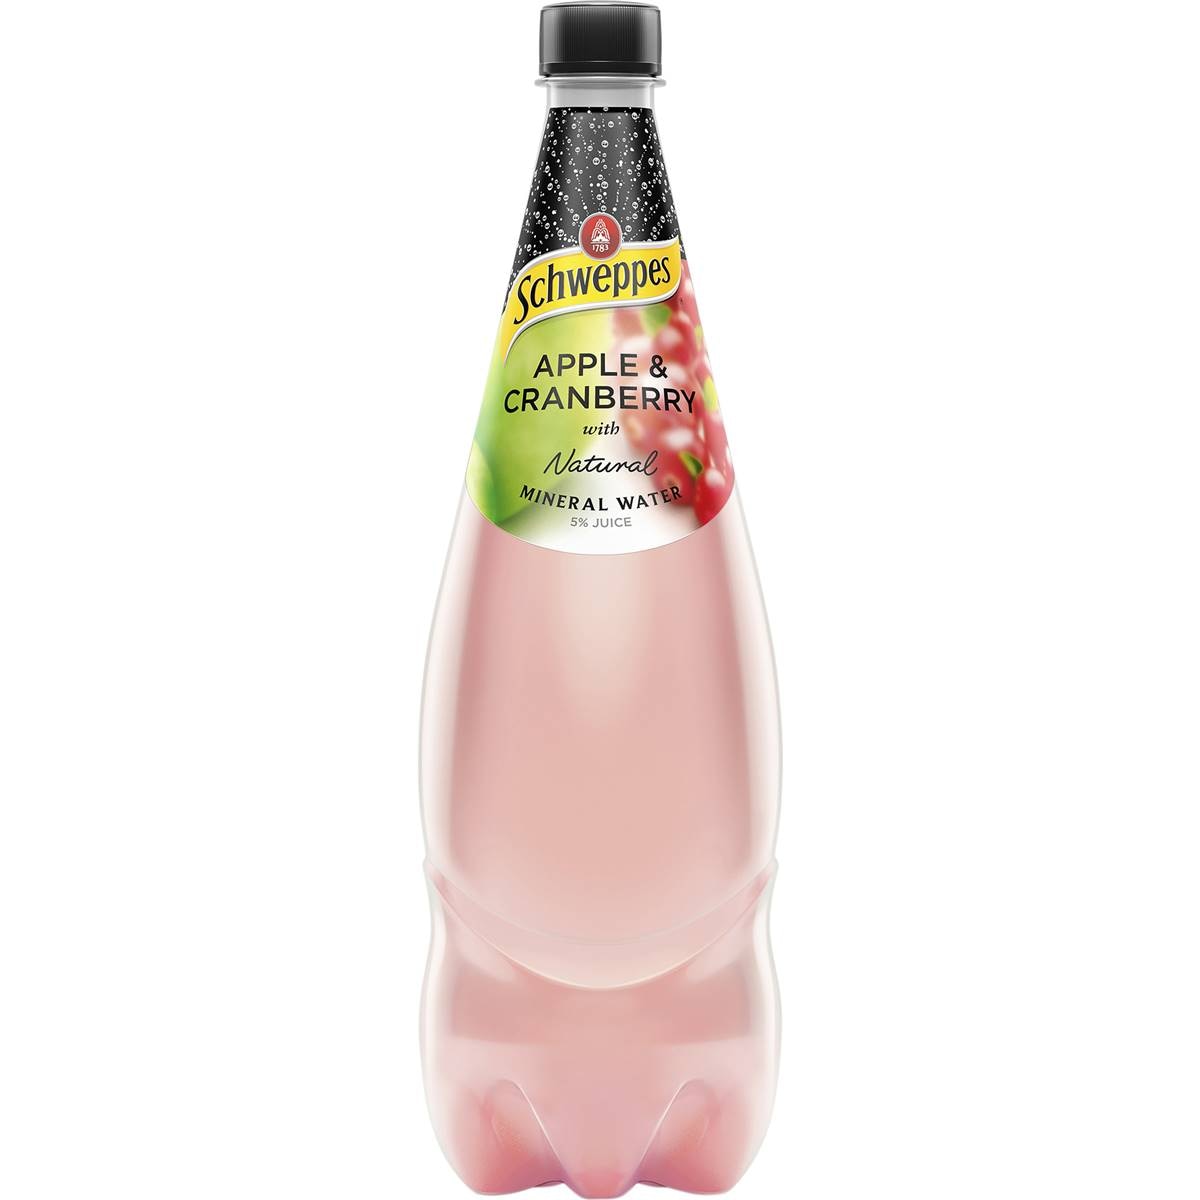 Calories in Schweppes Natural Mineral Water Apple & Cranberry